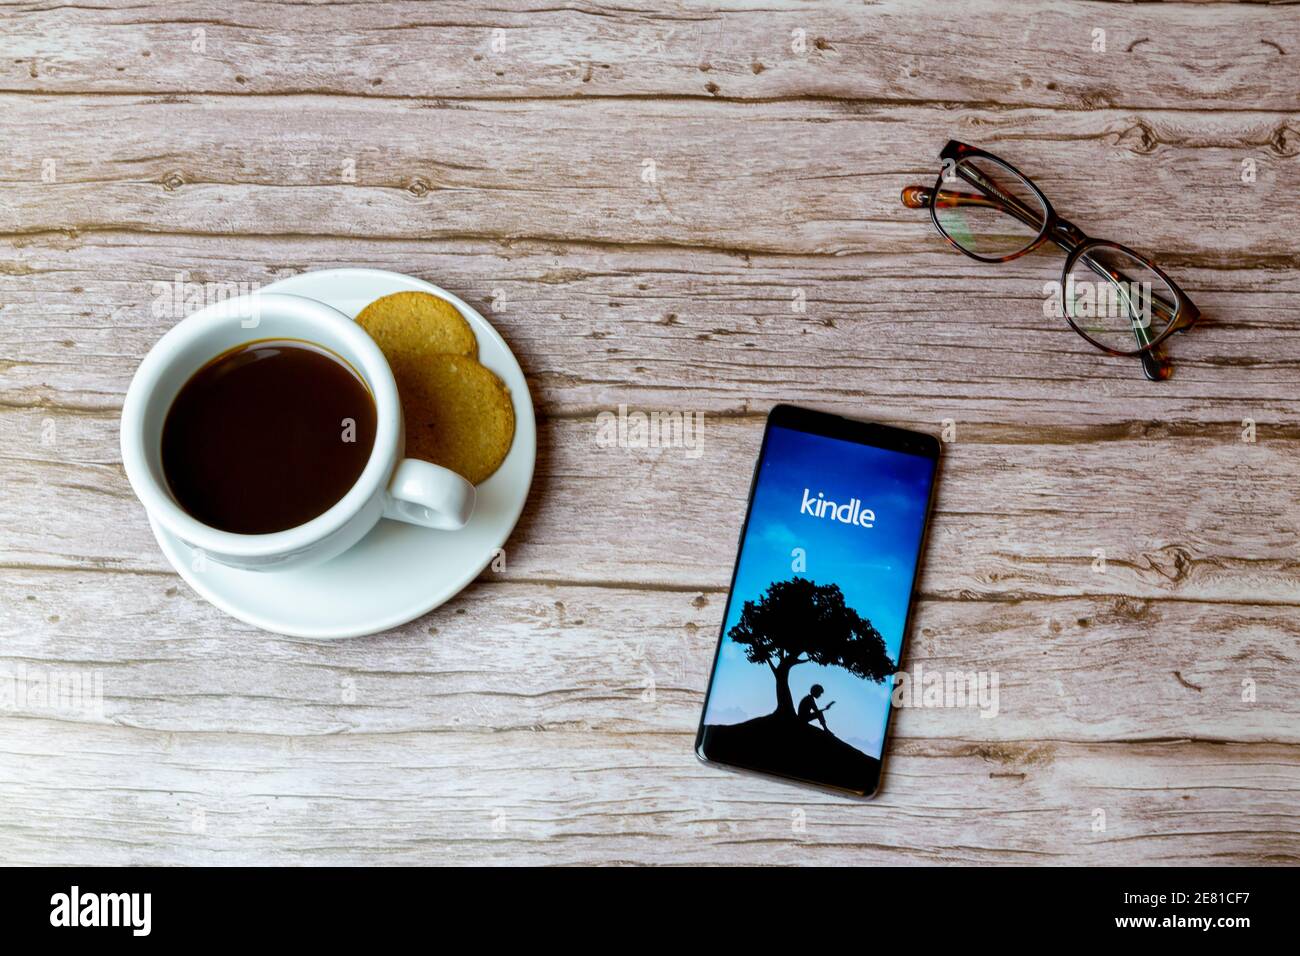 A Mobile phone or cell phone laid on a wooden table with the Amazon Kindle app opening also a coffee and glasses Stock Photo